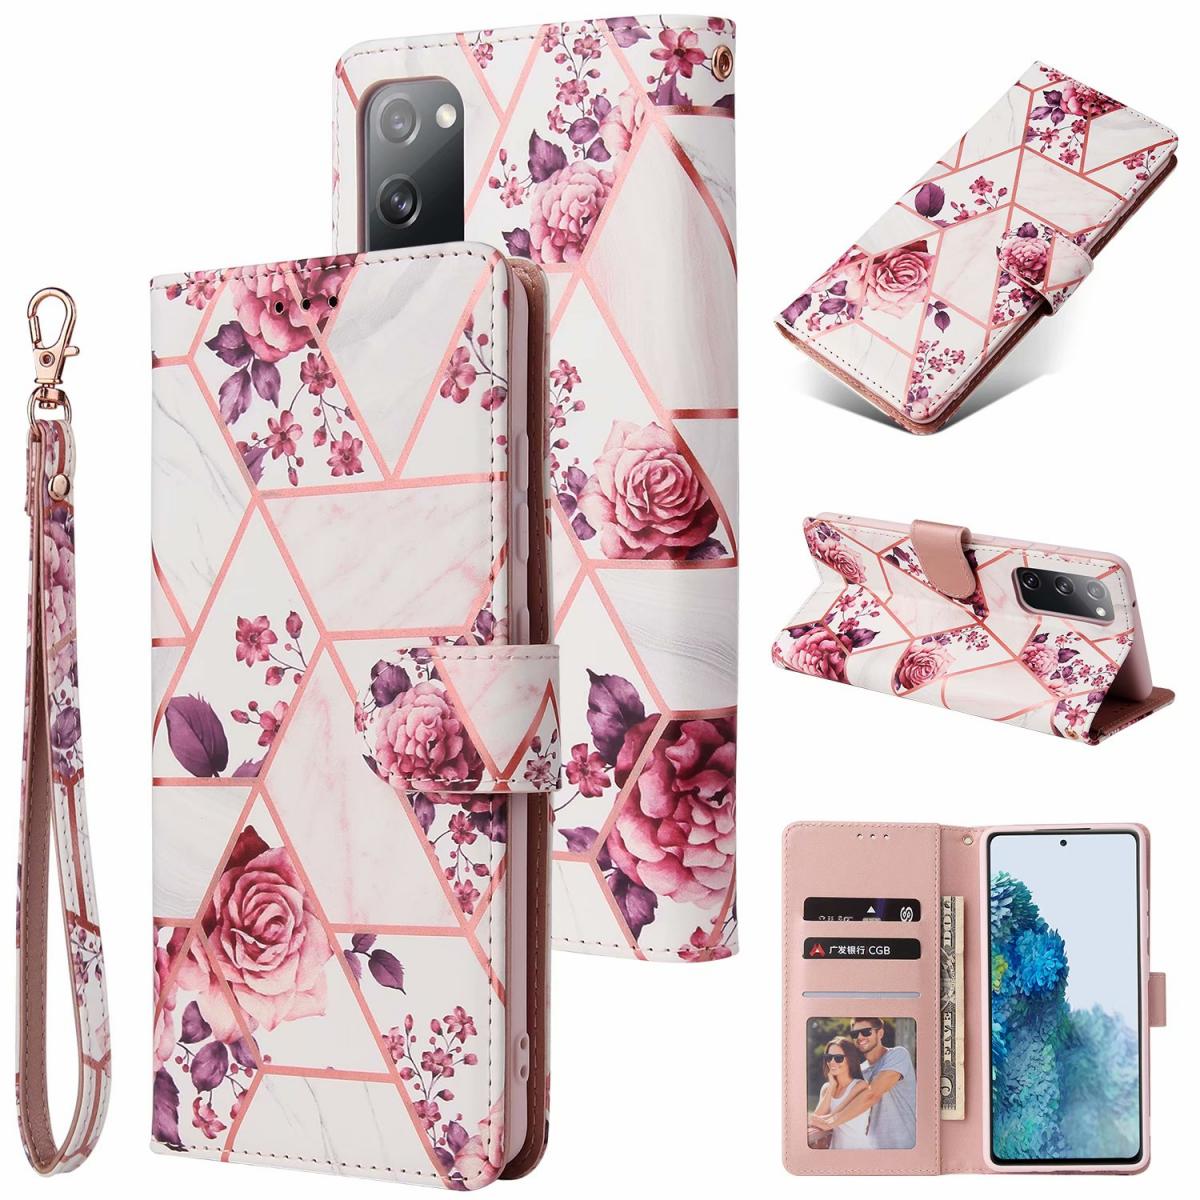 A-One Brand - Marble Grid Plånboksfodral till Galaxy S20 FE - Roses